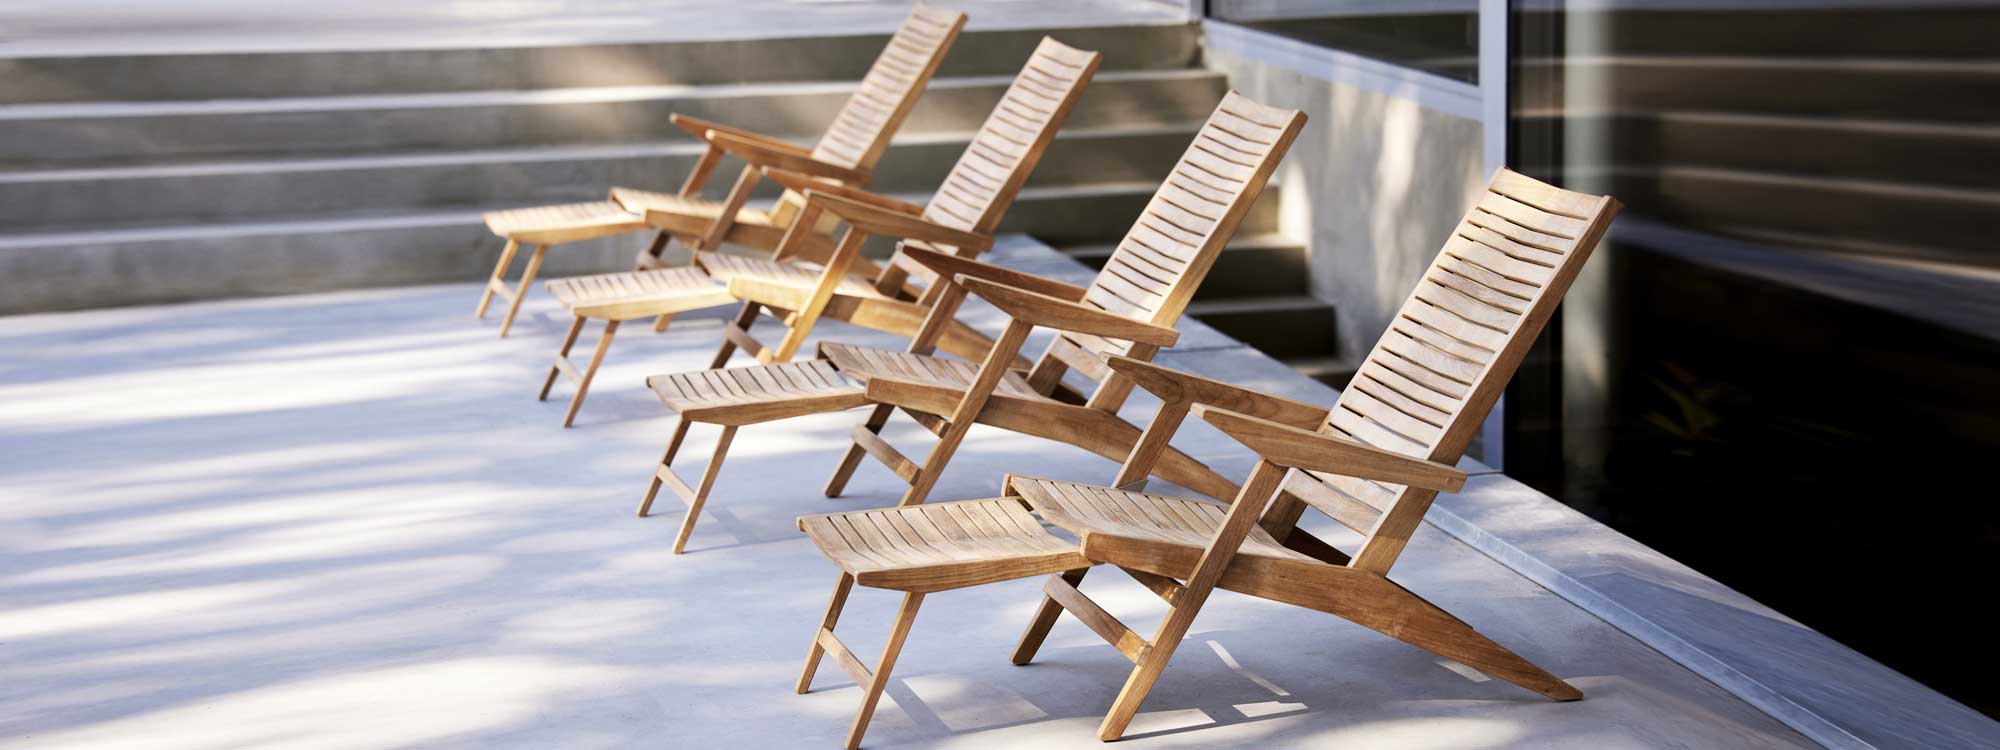 Image of row of Flip modern teak recliners with integrated foot rests designed by Strand+Hvass for Cane-line